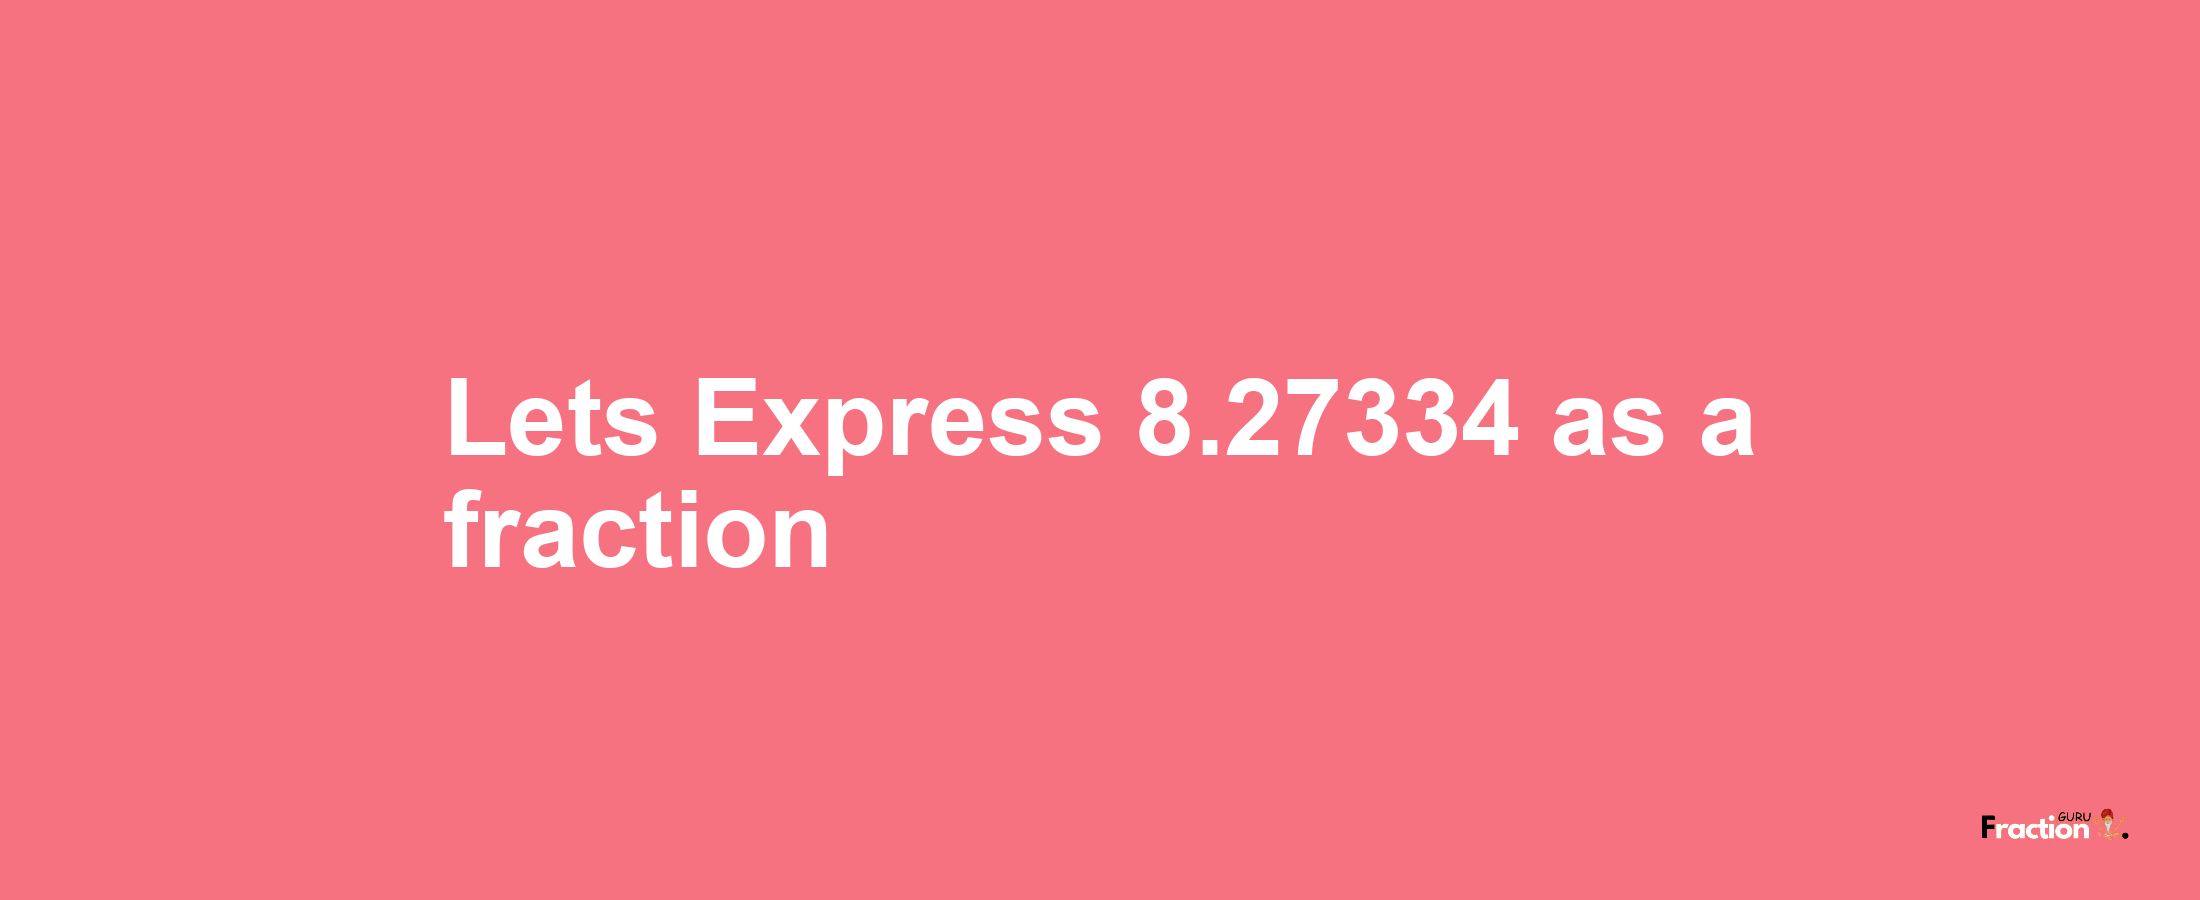 Lets Express 8.27334 as afraction